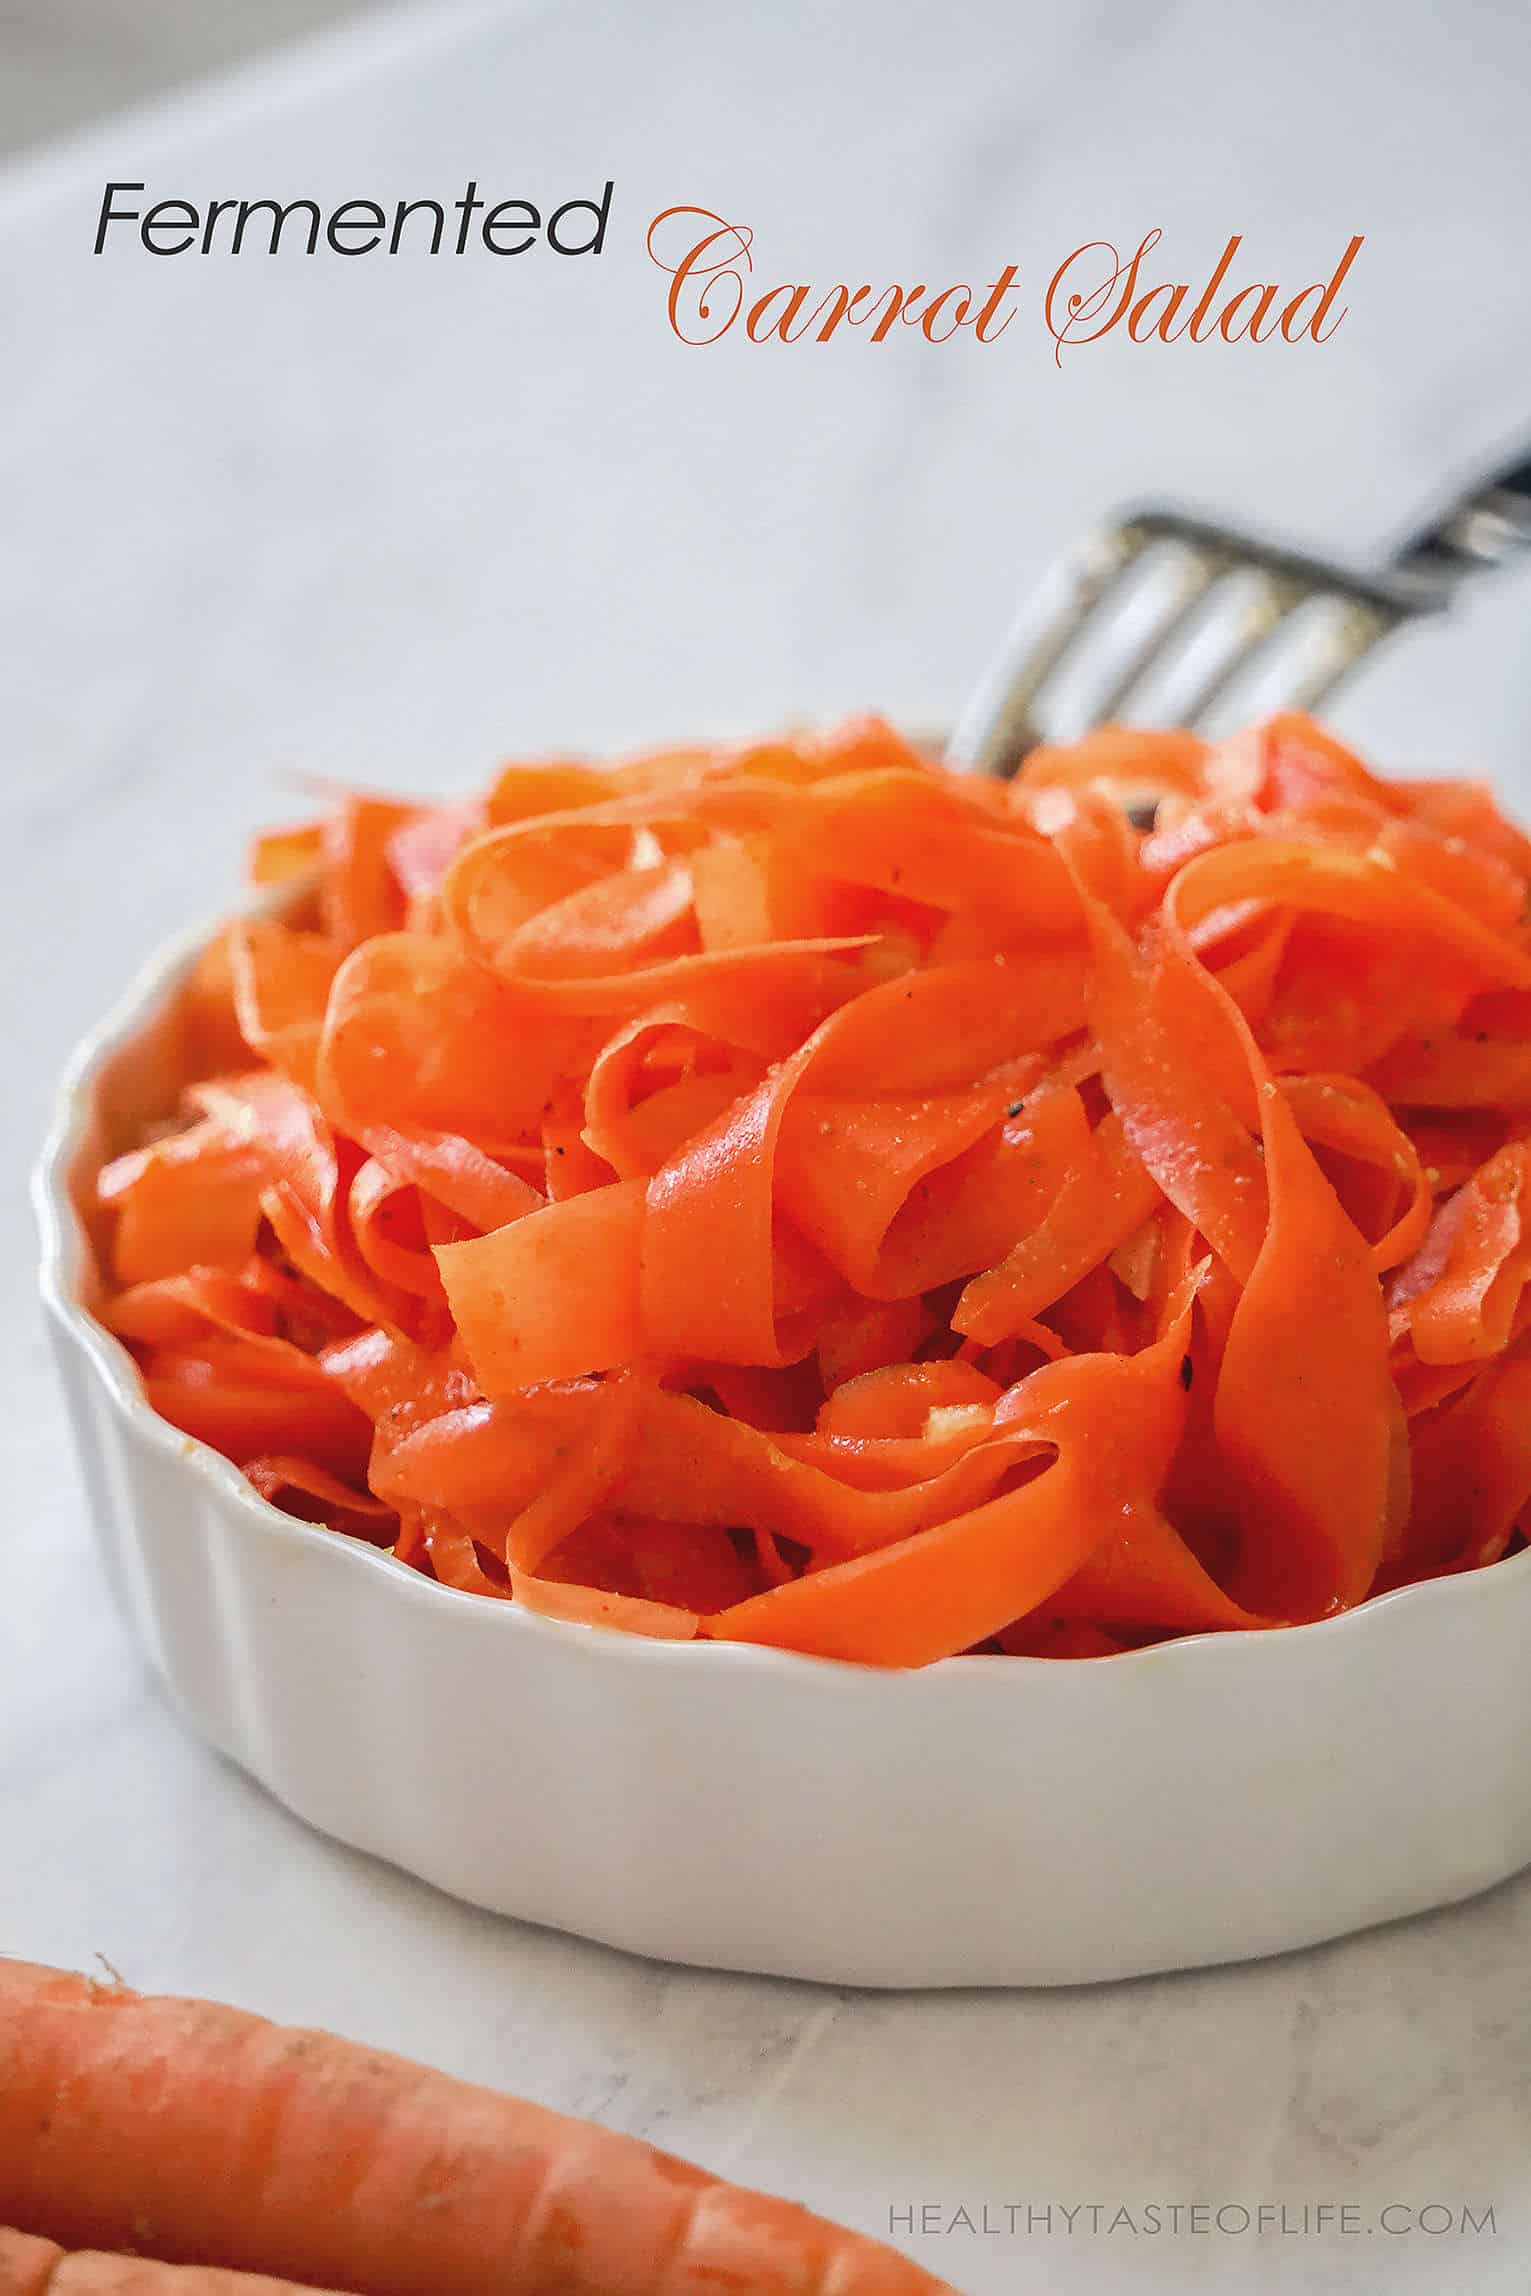 Vegan Carrot Salad made with fermented shaved carrots and a mix of spices.